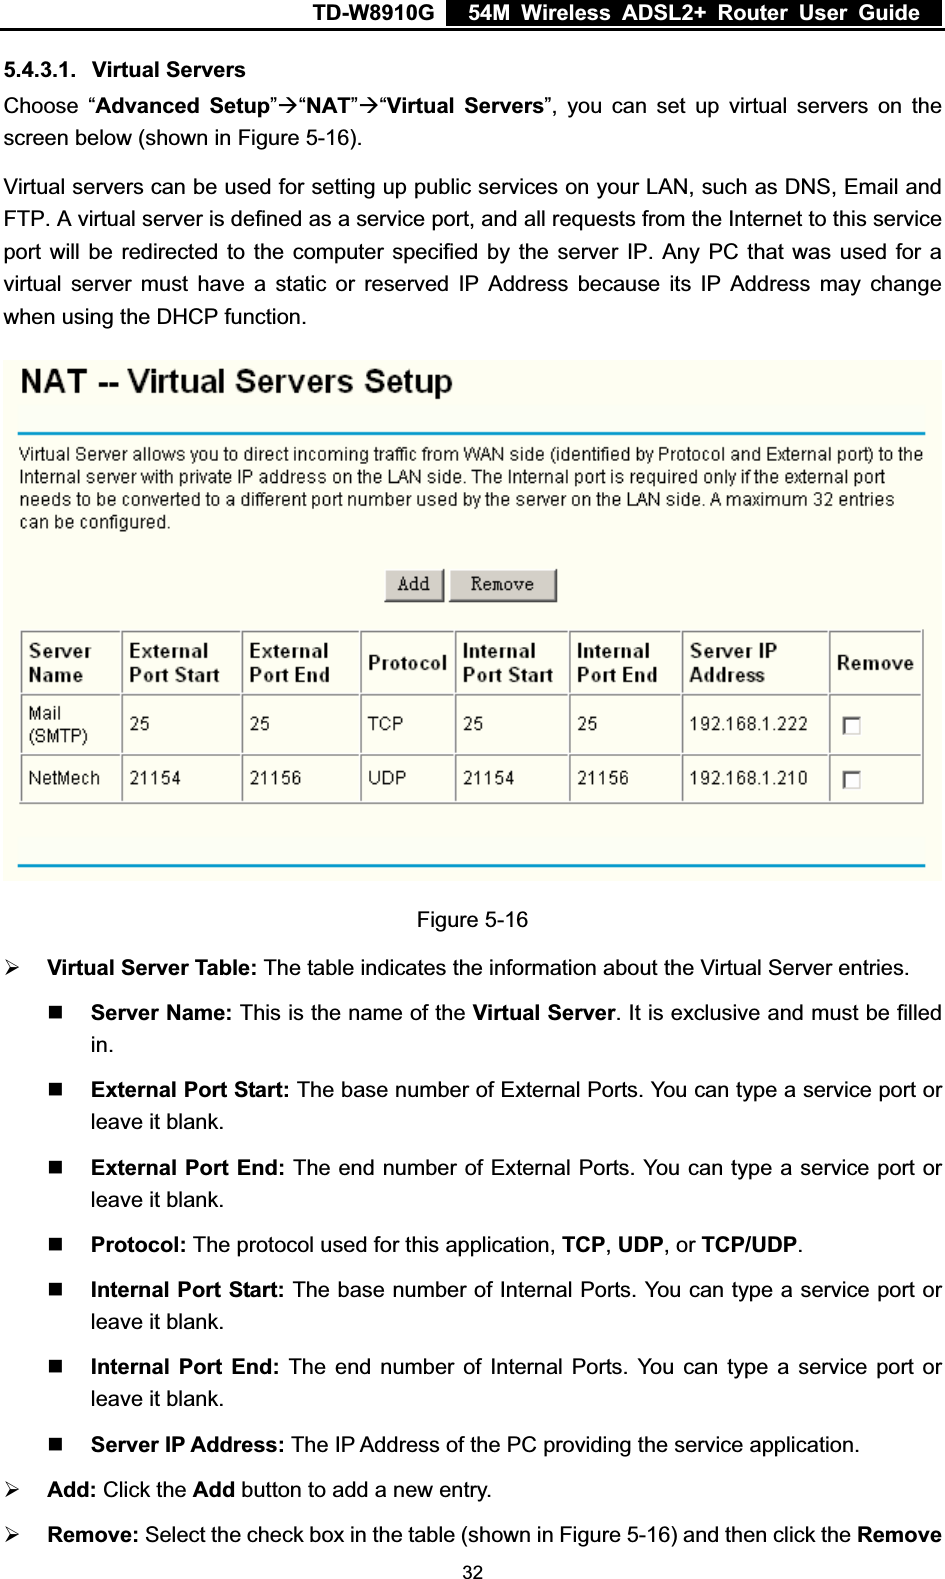 TD-W8910G    54M Wireless ADSL2+ Router User Guide  5.4.3.1. Virtual Servers Choose “Advanced Setup”Æ“NAT”Æ“Virtual Servers”, you can set up virtual servers on the screen below (shown in Figure 5-16). Virtual servers can be used for setting up public services on your LAN, such as DNS, Email and FTP. A virtual server is defined as a service port, and all requests from the Internet to this service port will be redirected to the computer specified by the server IP. Any PC that was used for a virtual server must have a static or reserved IP Address because its IP Address may change when using the DHCP function. Figure 5-16 ¾Virtual Server Table: The table indicates the information about the Virtual Server entries. Server Name: This is the name of the Virtual Server. It is exclusive and must be filled in.External Port Start: The base number of External Ports. You can type a service port or leave it blank. External Port End: The end number of External Ports. You can type a service port or leave it blank. Protocol: The protocol used for this application, TCP,UDP, or TCP/UDP.Internal Port Start: The base number of Internal Ports. You can type a service port or leave it blank. Internal Port End: The end number of Internal Ports. You can type a service port or leave it blank. Server IP Address: The IP Address of the PC providing the service application.¾Add: Click the Add button to add a new entry.¾Remove: Select the check box in the table (shown in Figure 5-16) and then click the Remove 32